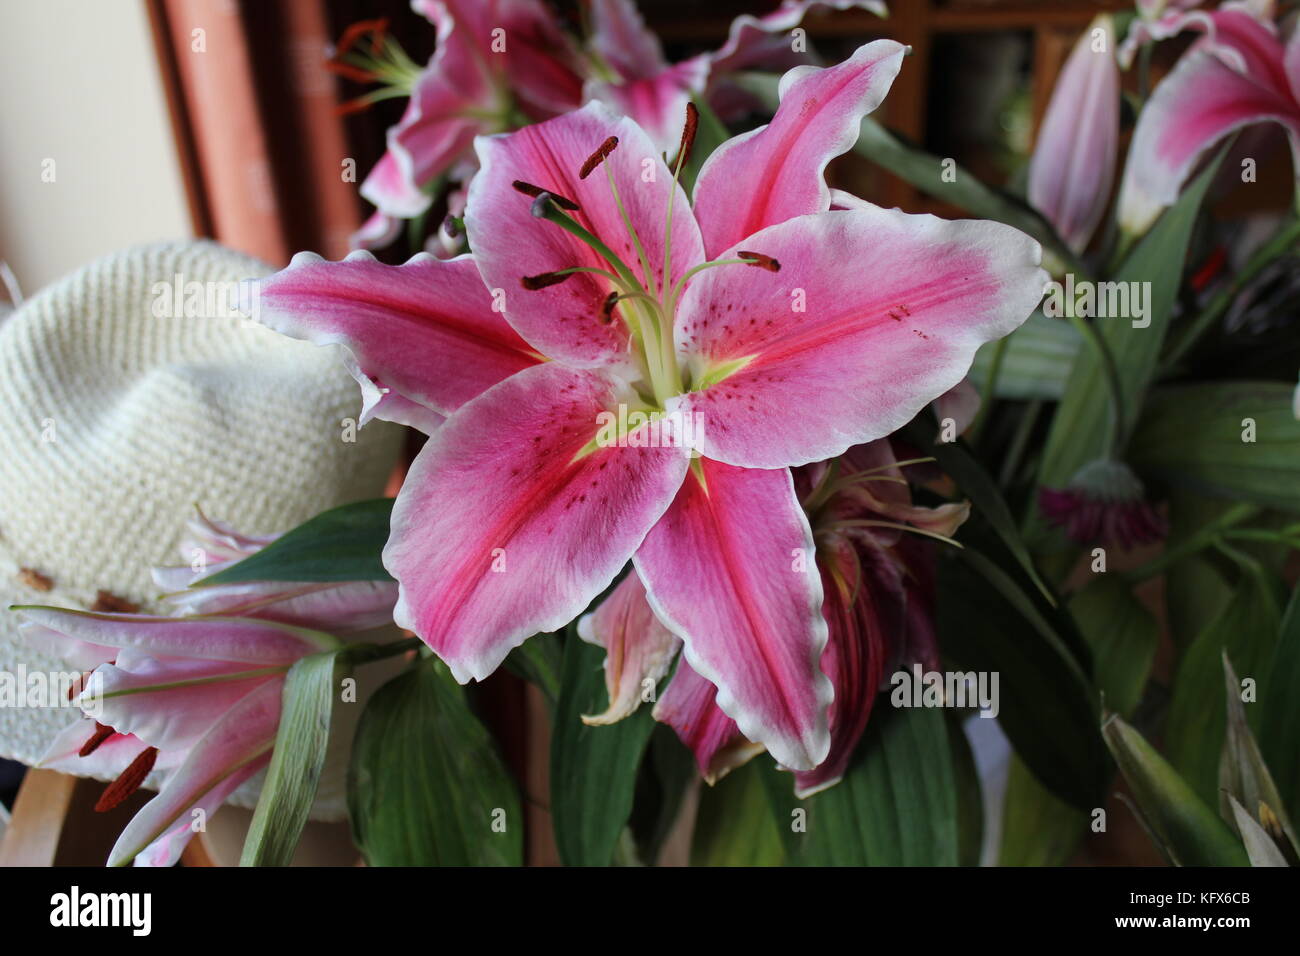 Star gazer lily in Bloom Banque D'Images